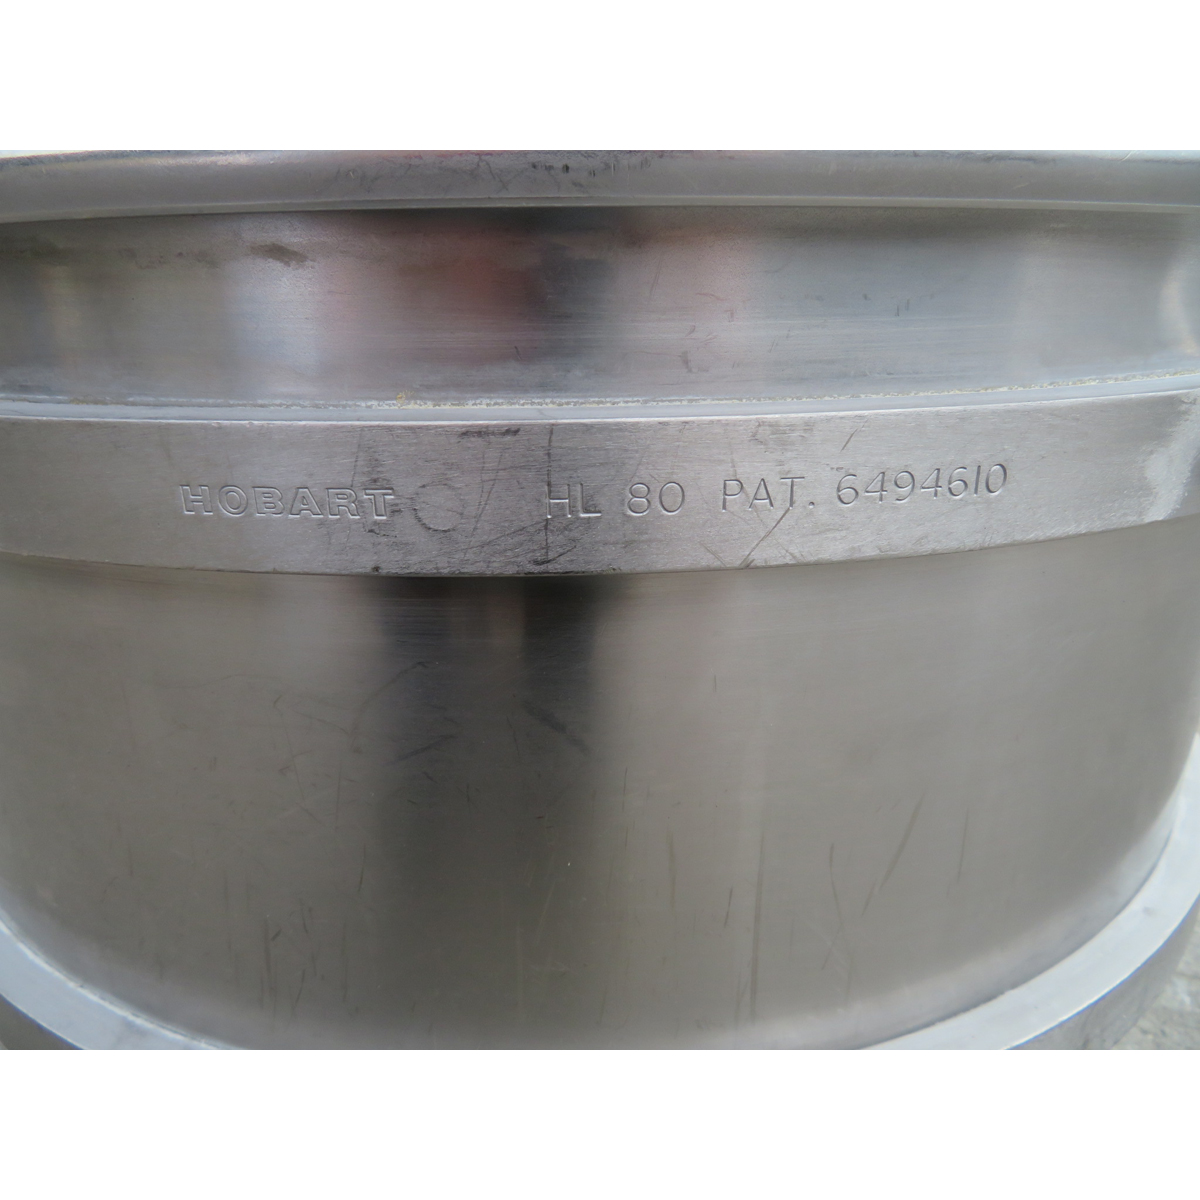 Hobart Legacy BOWL-HL80 80 Qt. Stainless Steel Bowl for HL800 Mixer, Used Excellent Condition image 3